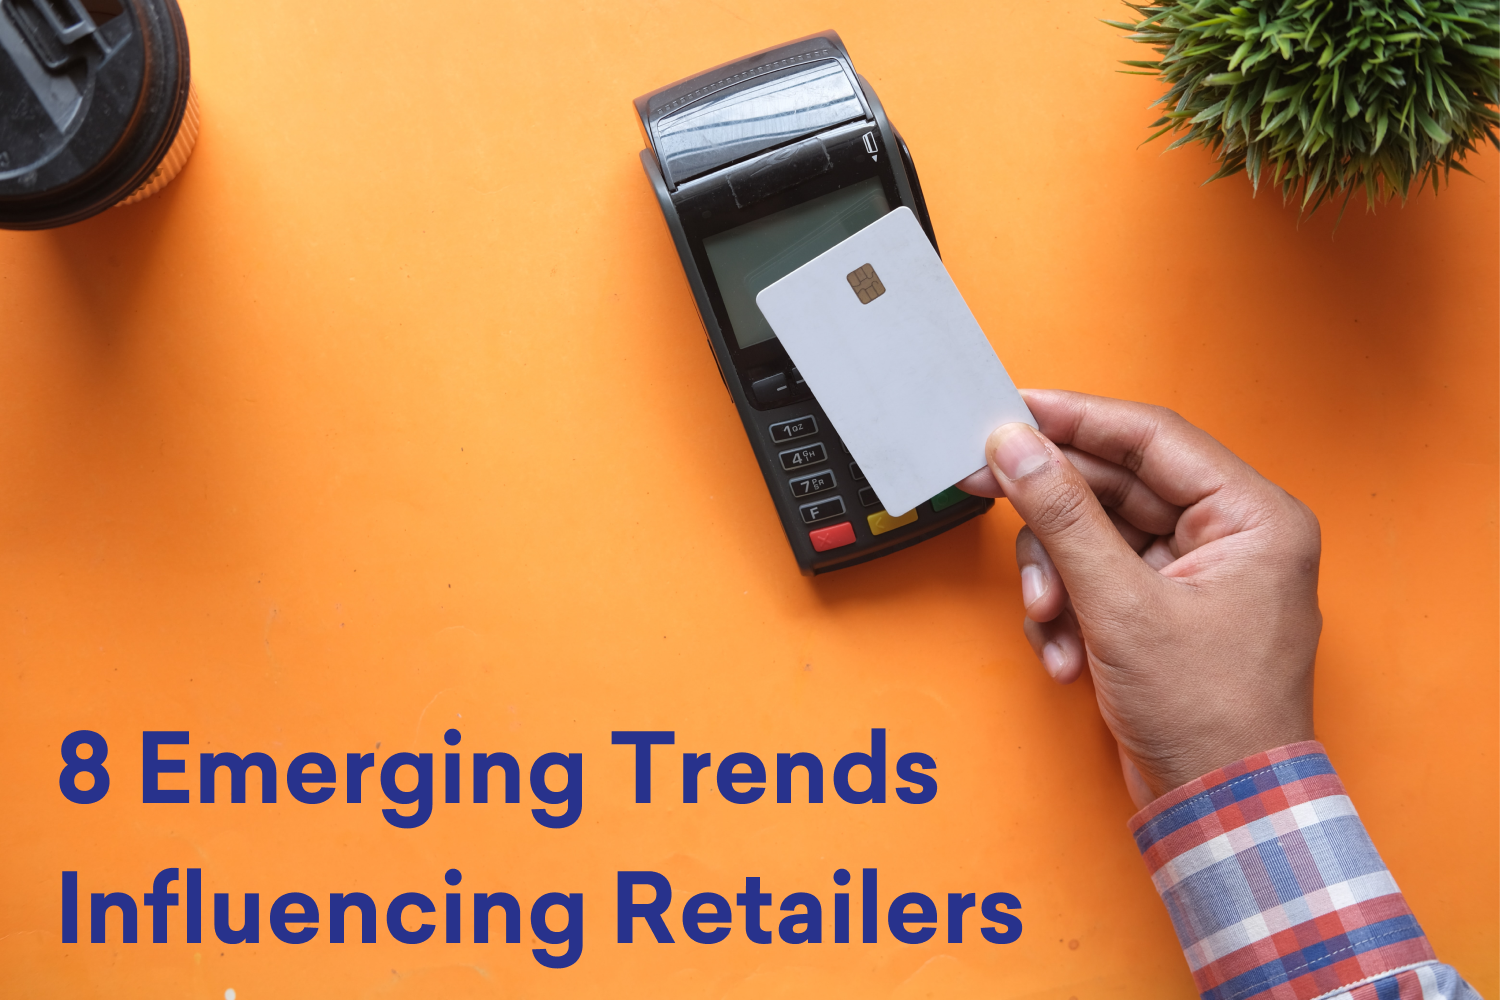 A Snapshot of Emerging IT Trends Influencing Retailers